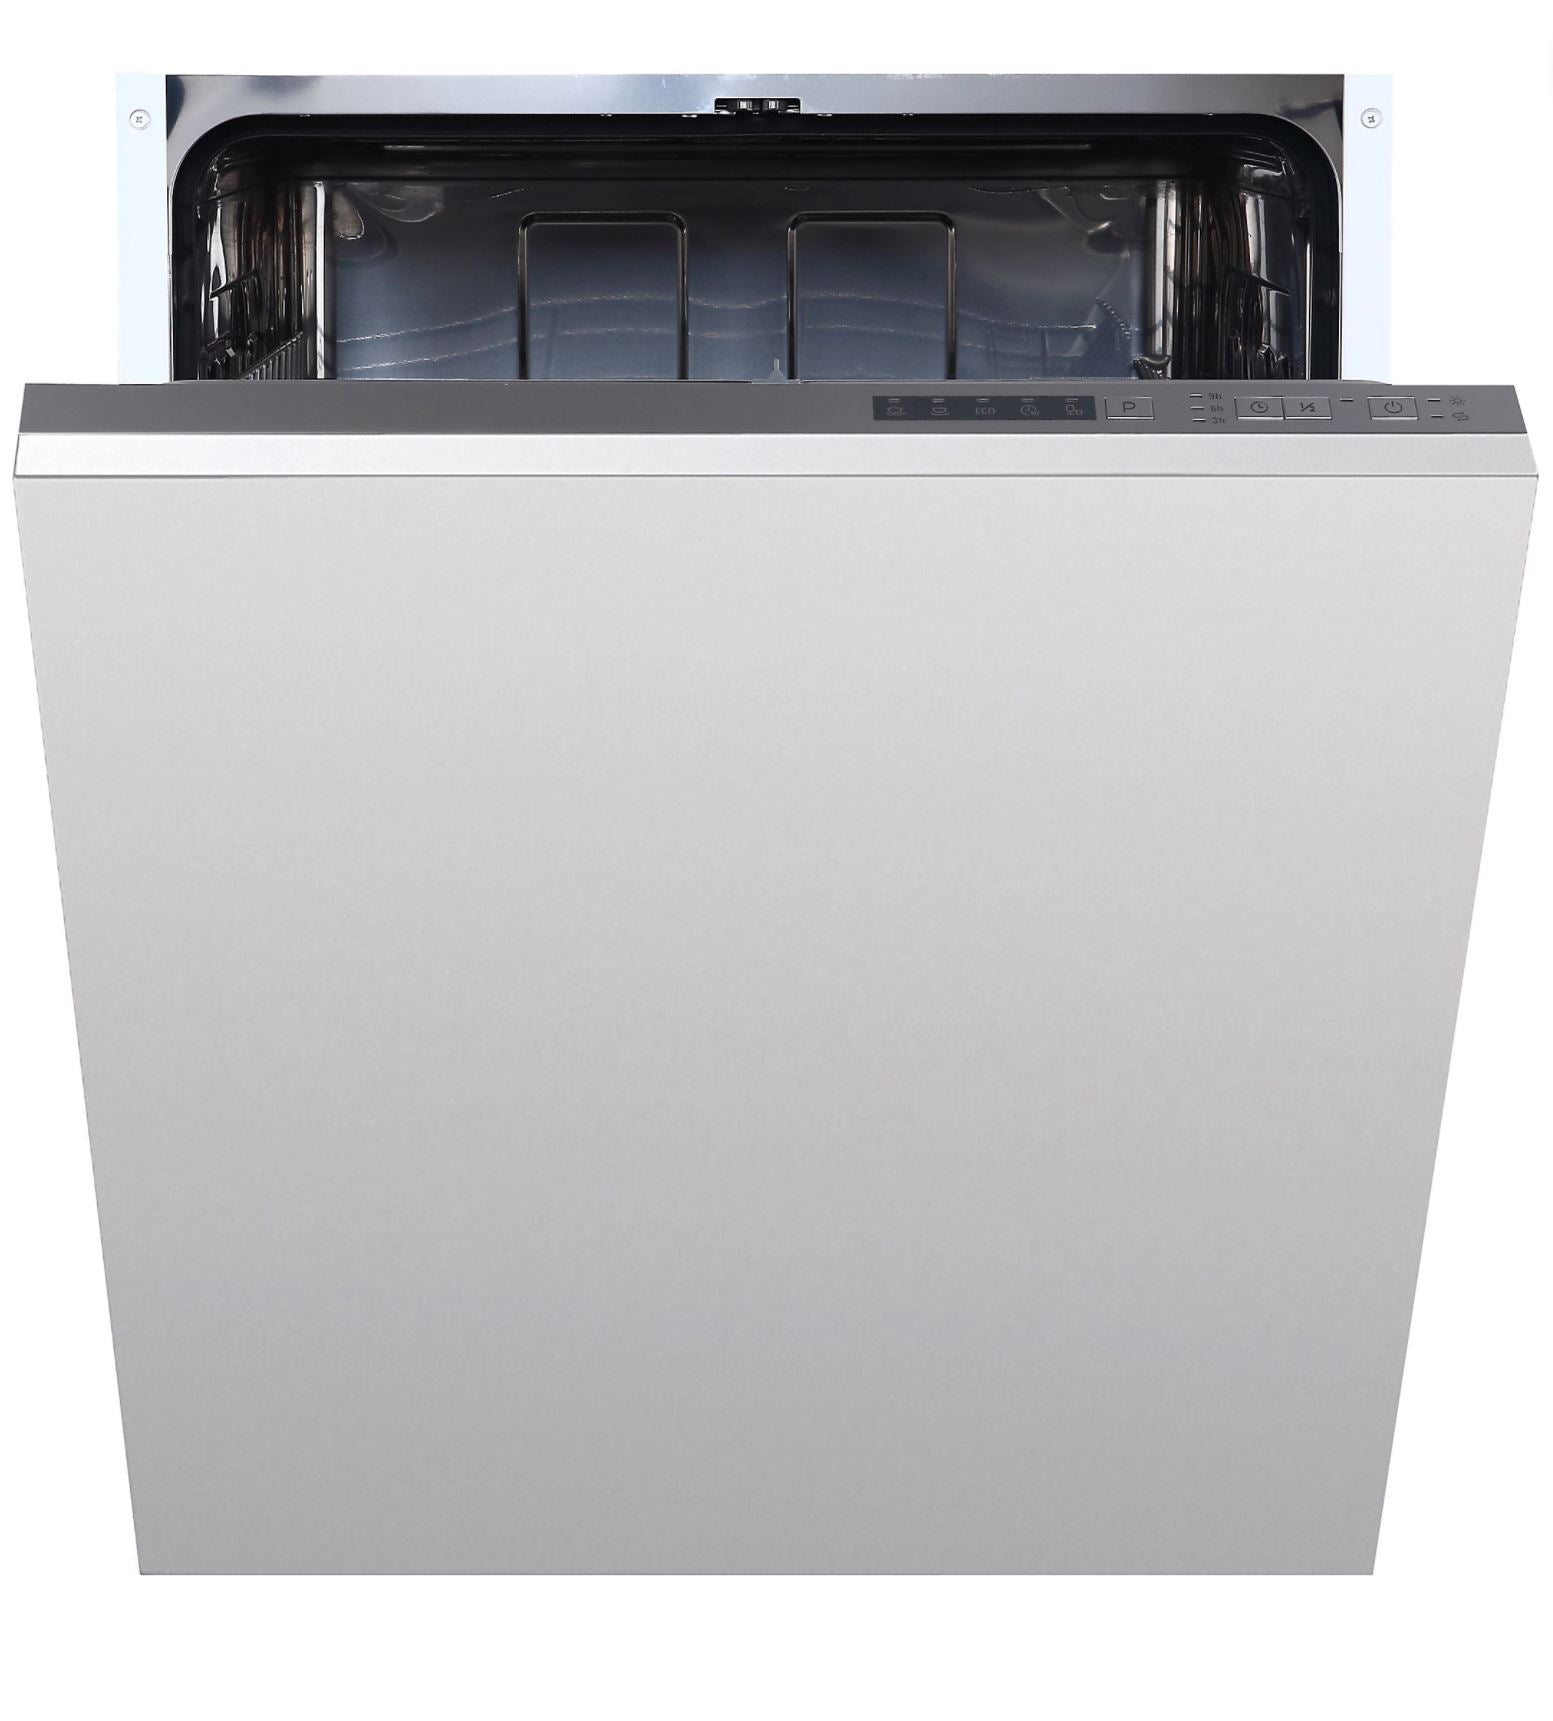 Cata Integrated White Full size Dishwasher IDW60M 11.5L - 9456